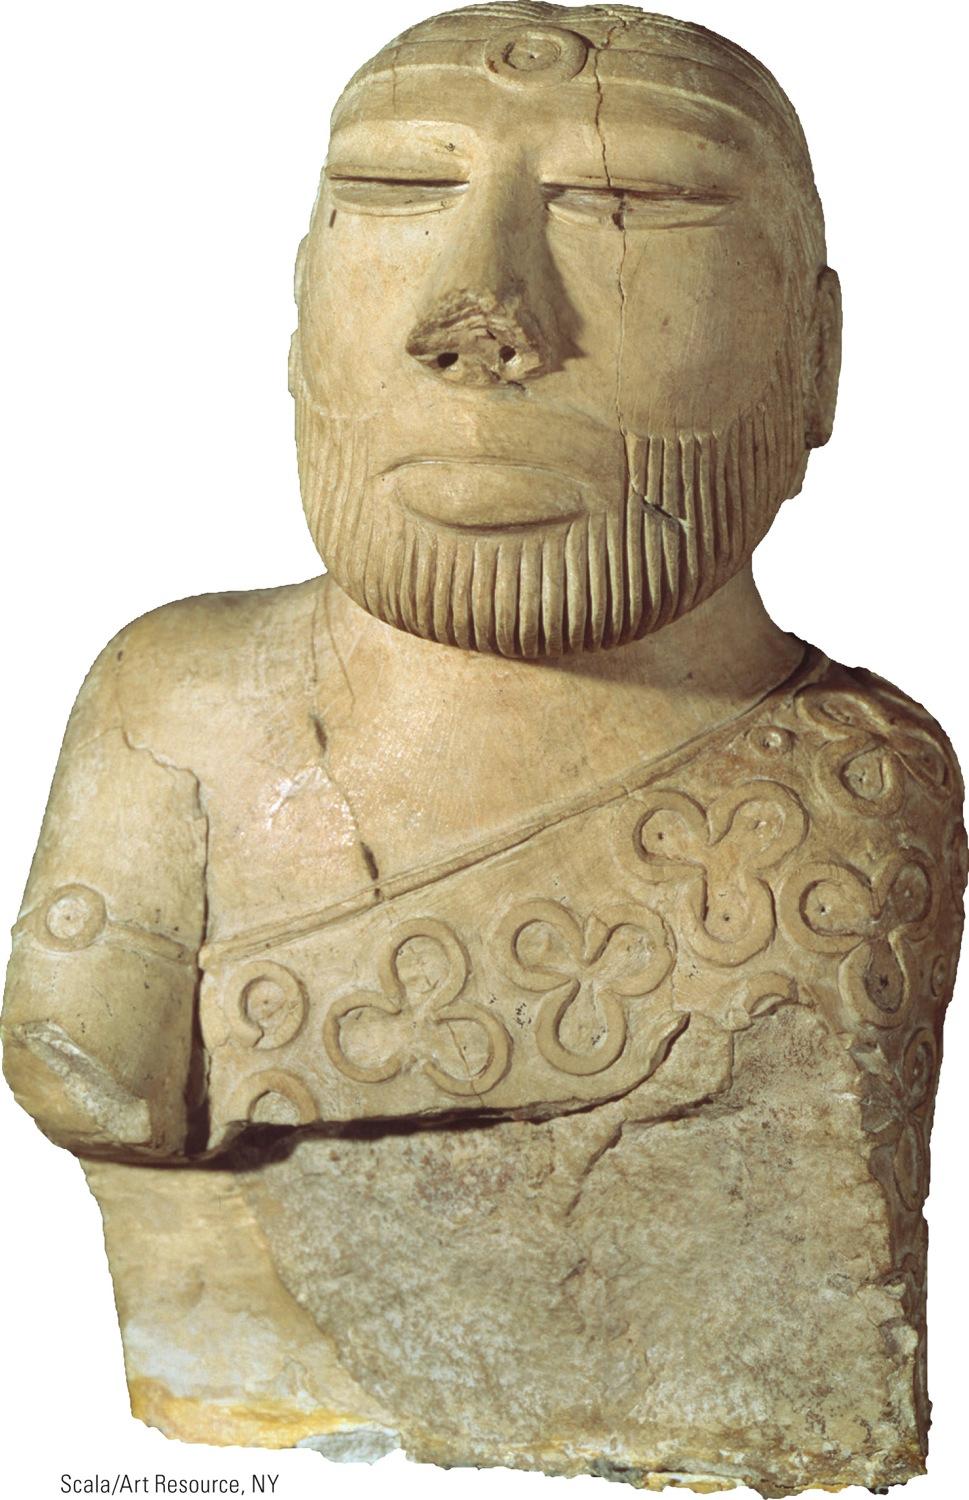 Man from Mohenjo-Daro, circa 2600 1900 B.C.E. This statue of a seated man wearing a cloak and headband was carved from a soft stone called steatite.